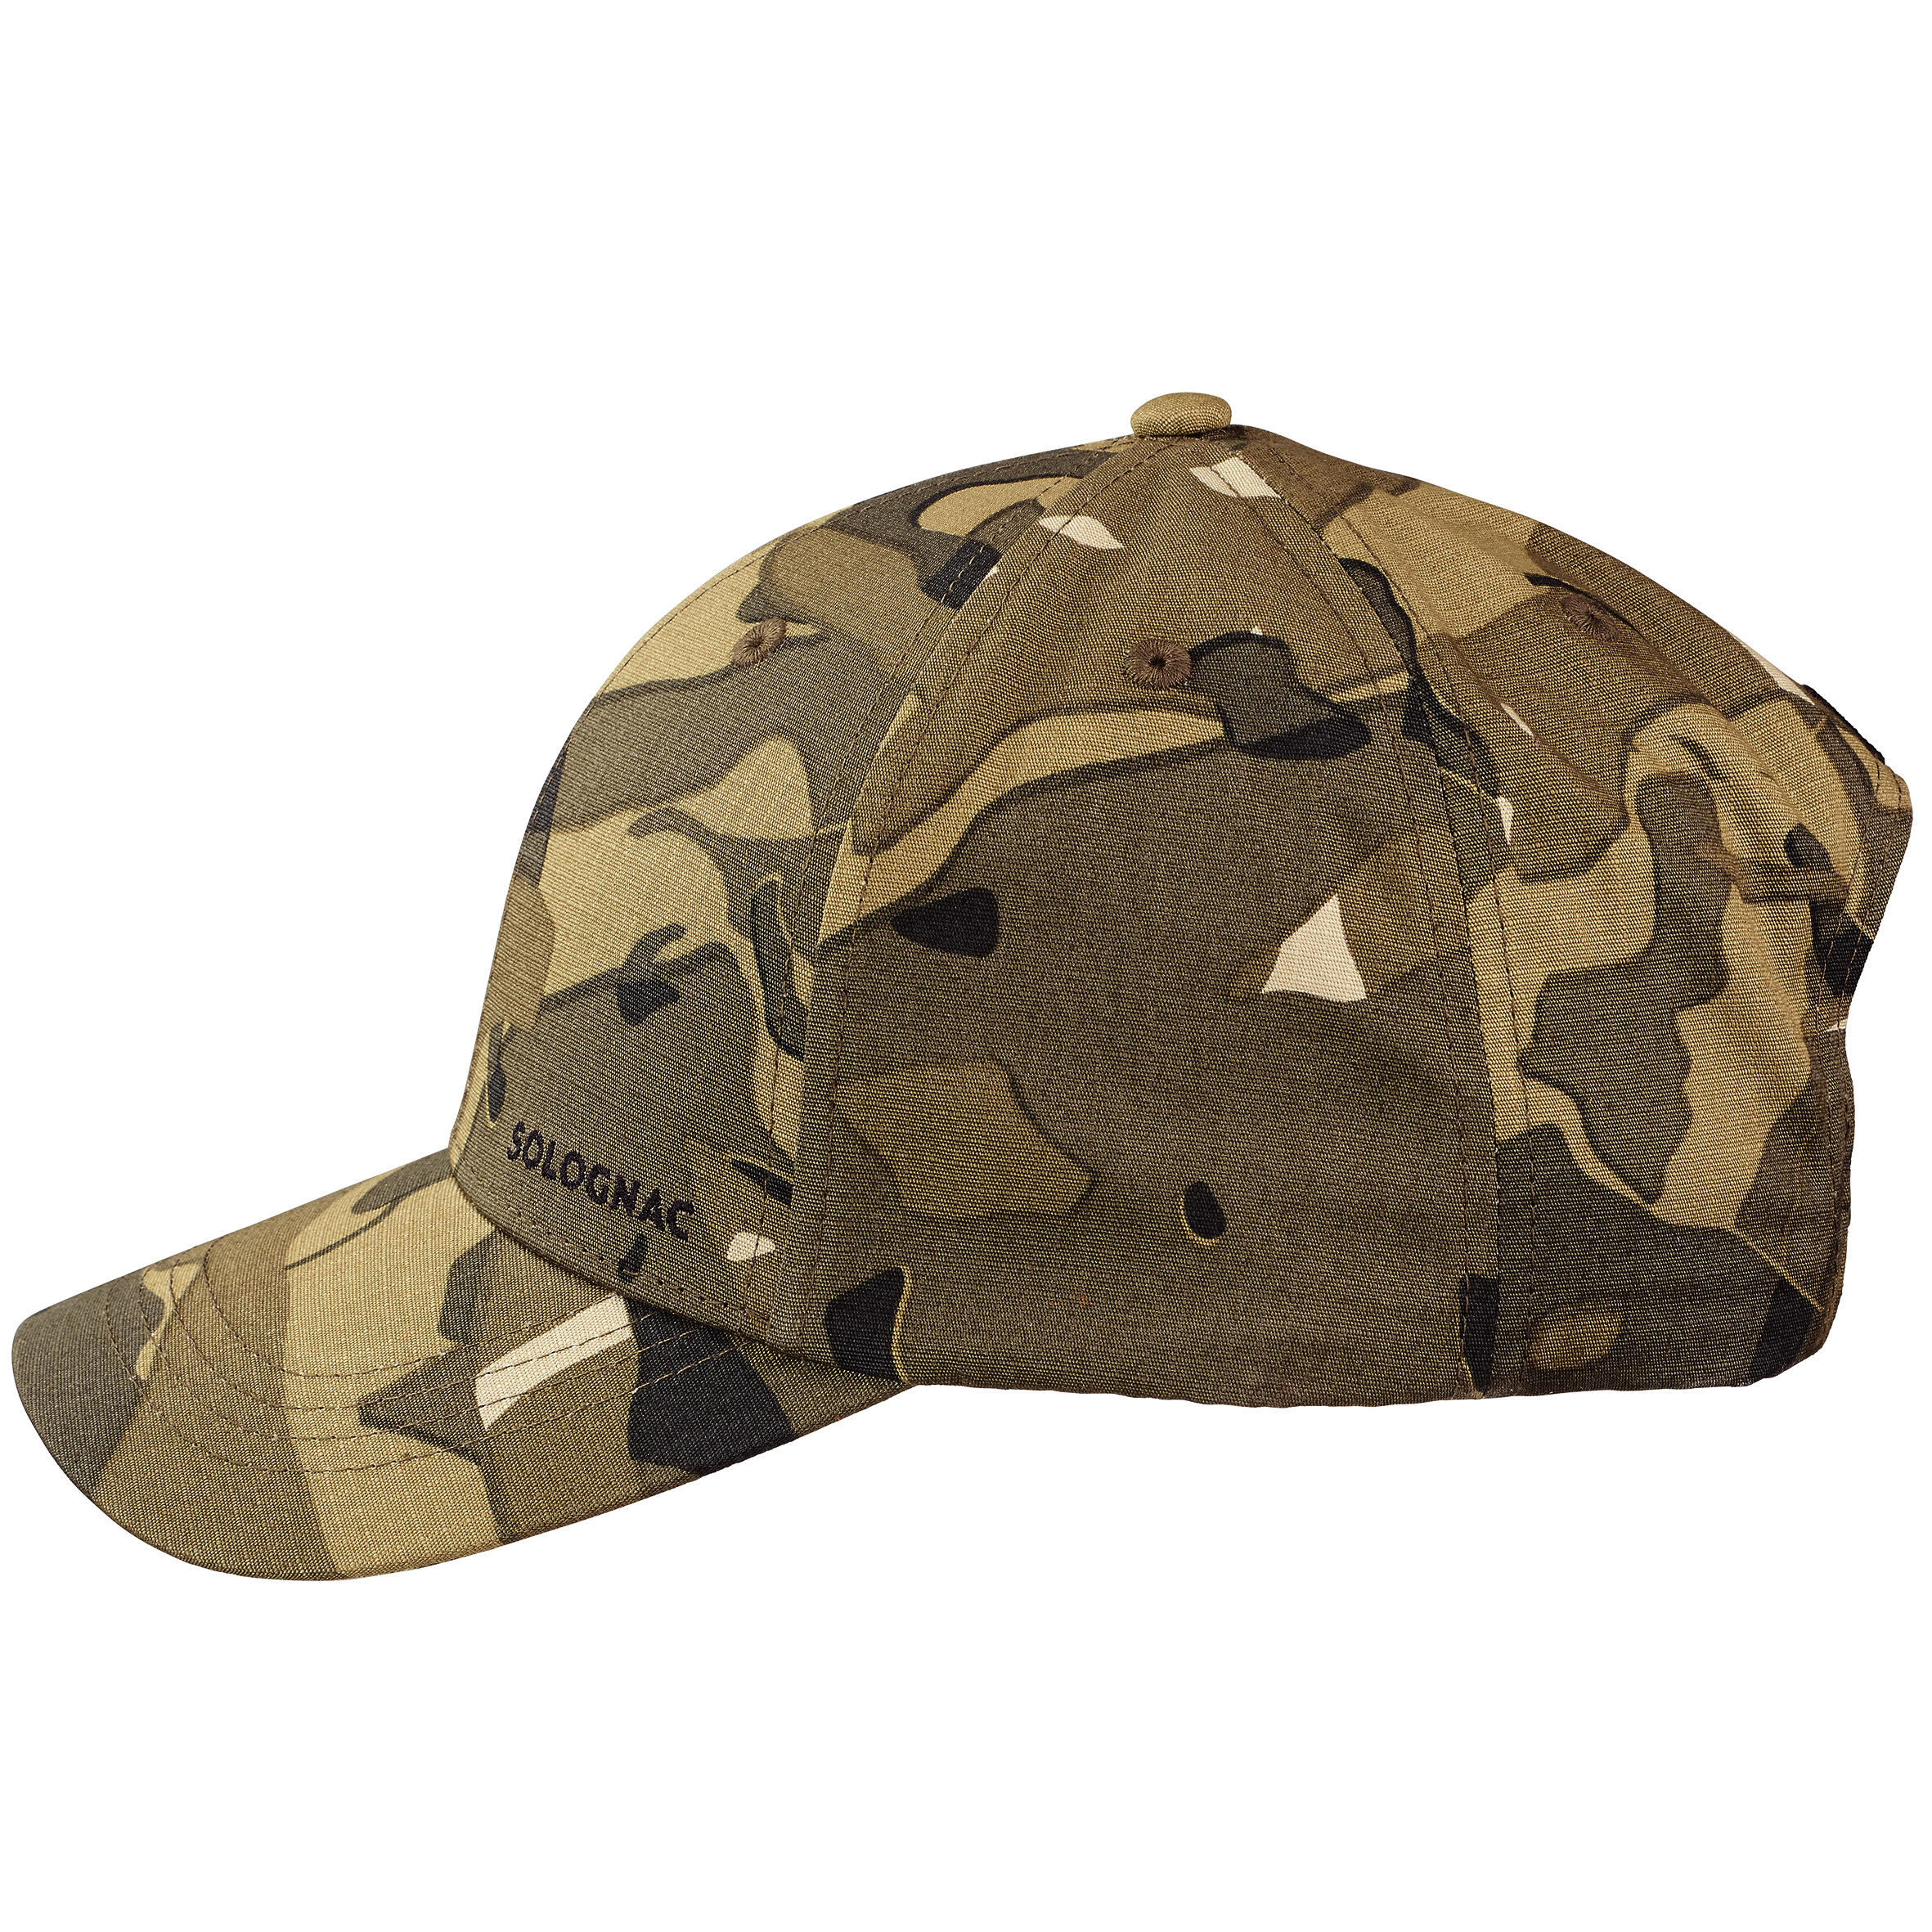 Country Sport Durable Cap 500 Woodland Camouflage Green 5/8